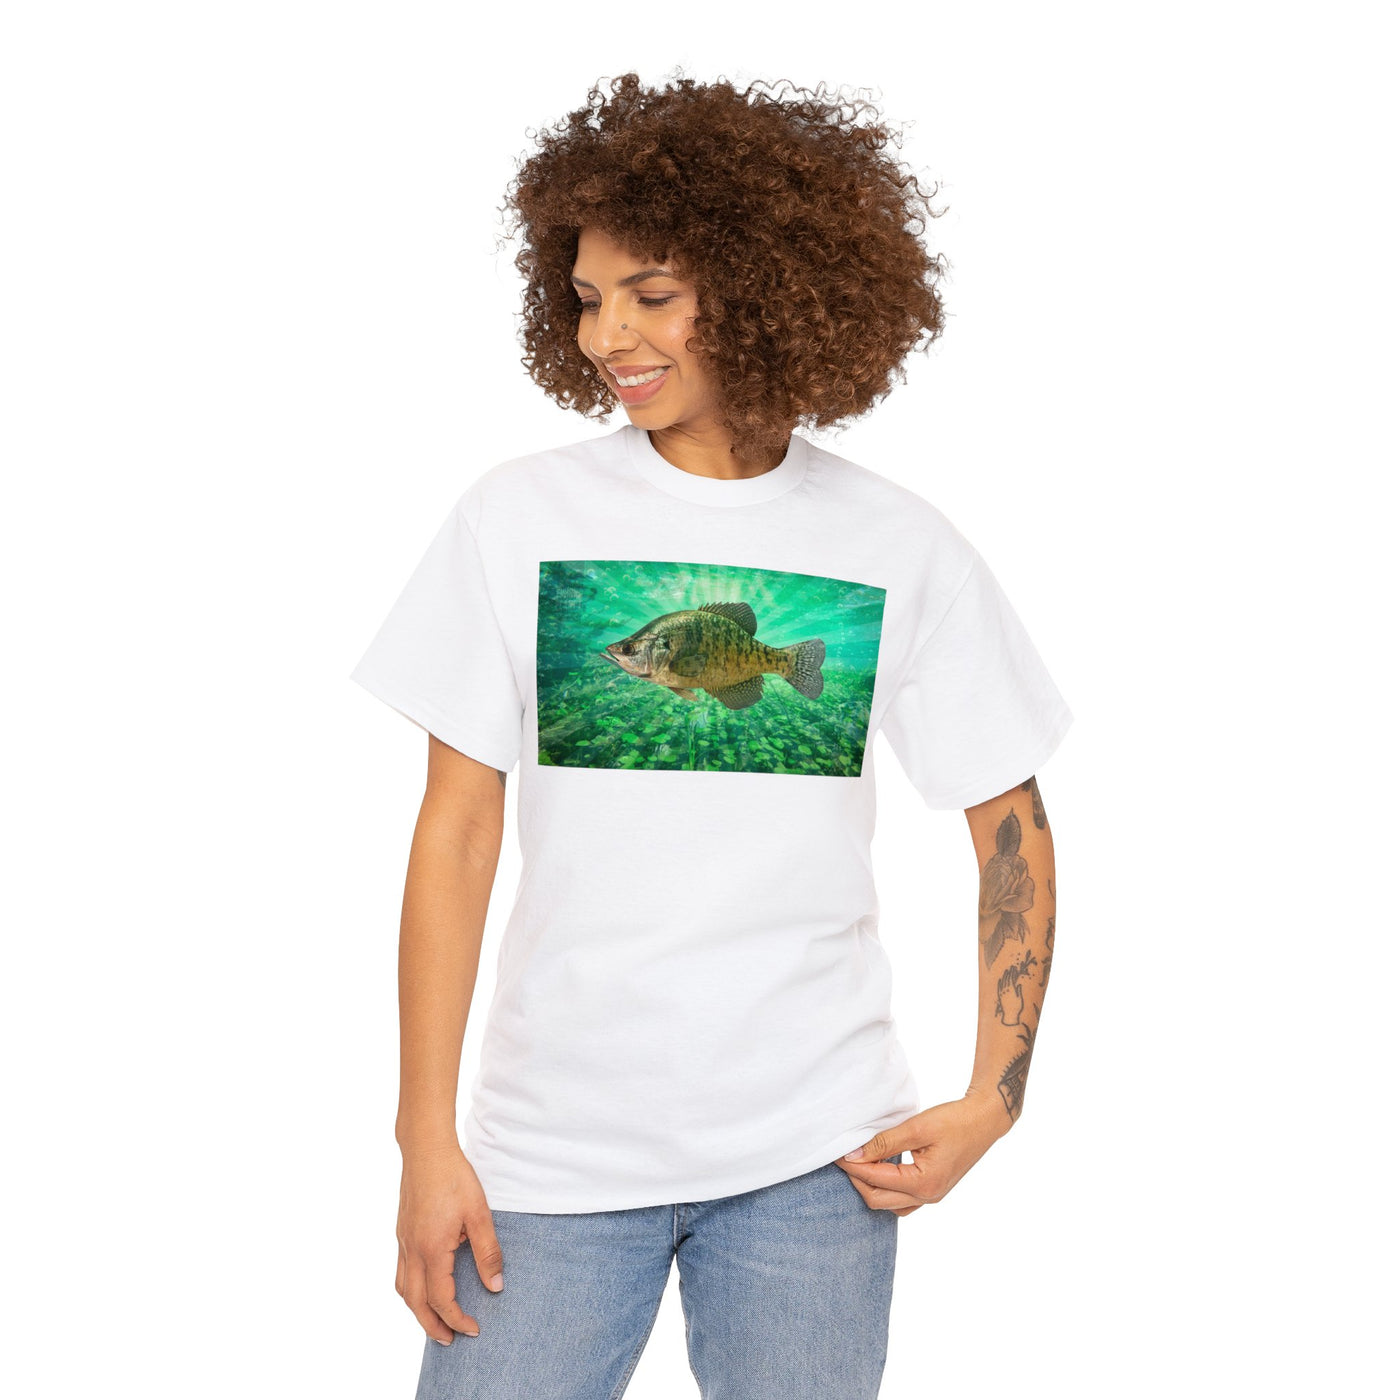 Fishing Planet Crappie Cotton Tee